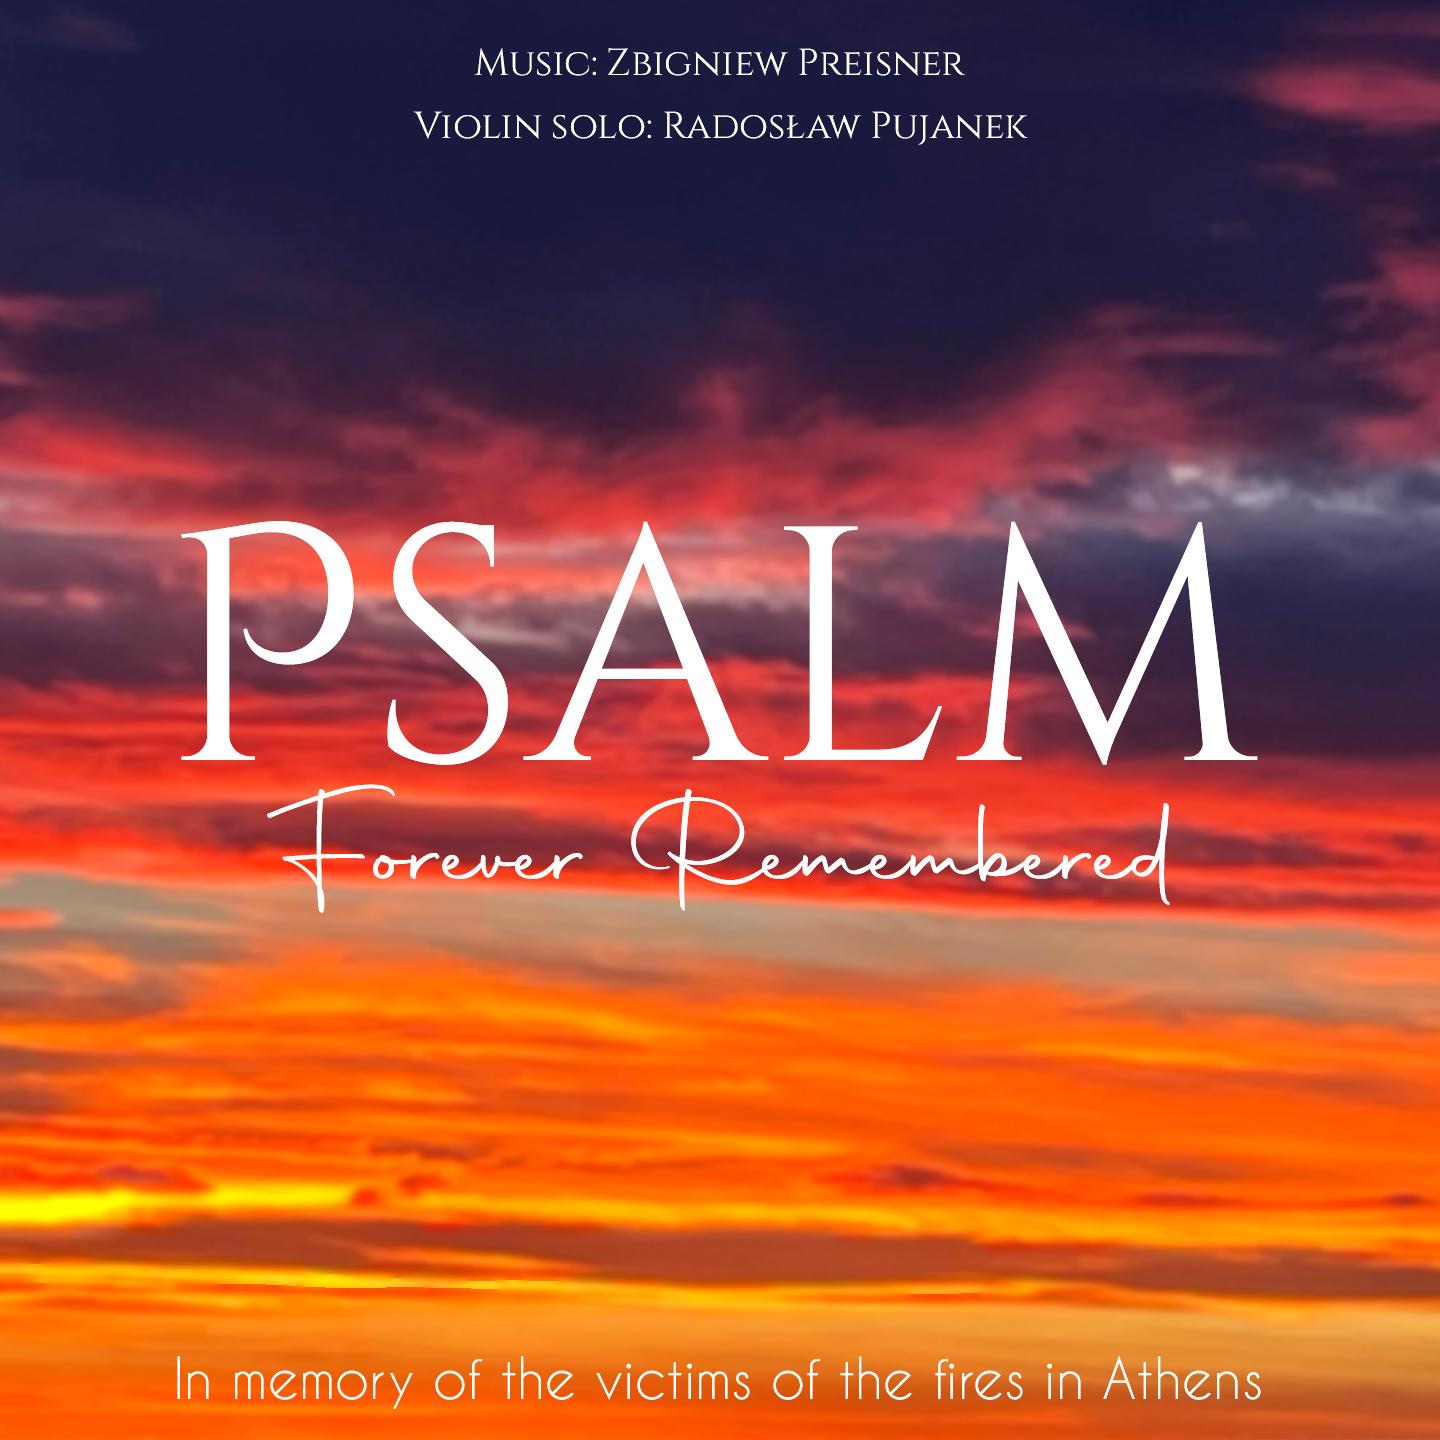 Psalm_Cover-min